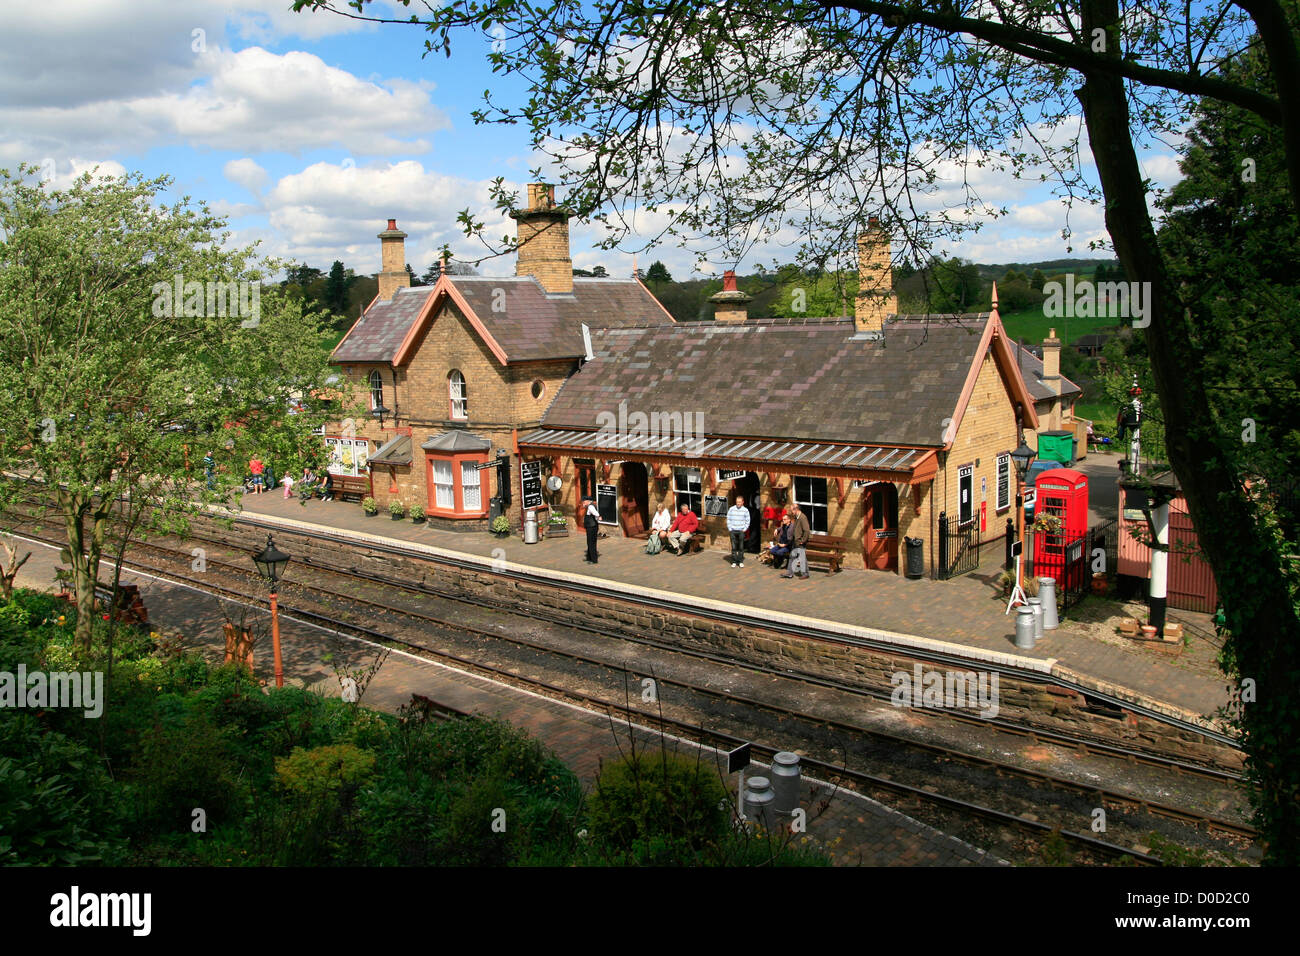 Severn Valley Railway Station Arley Worcestershire Inghilterra REGNO UNITO Foto Stock